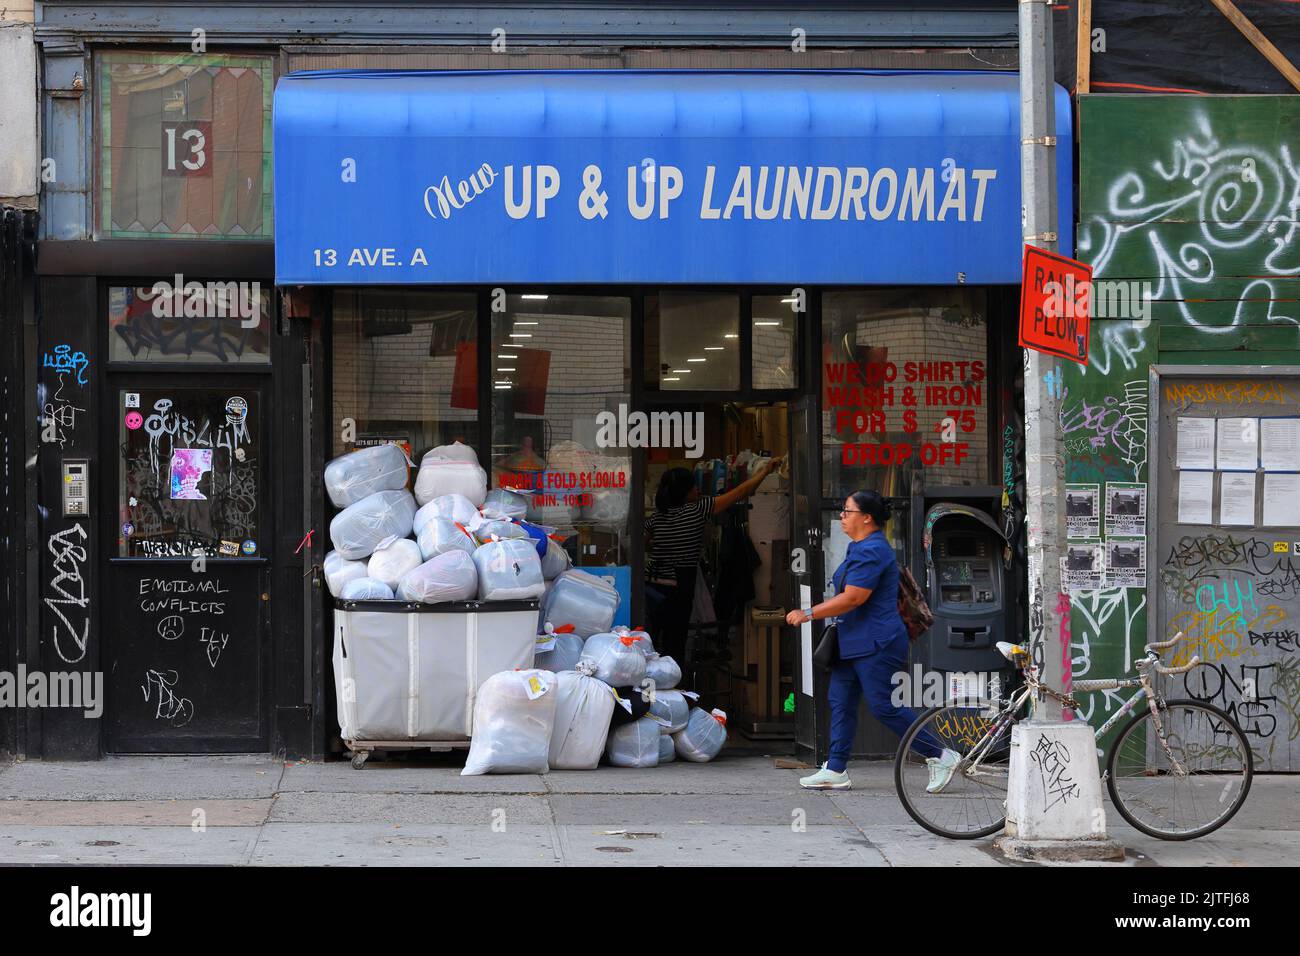 Up & Up Laundromat, 13 Avenue A, New York, NYC storefront photo of a laundromat in Manhattan's East Village neighborhood. Stock Photo